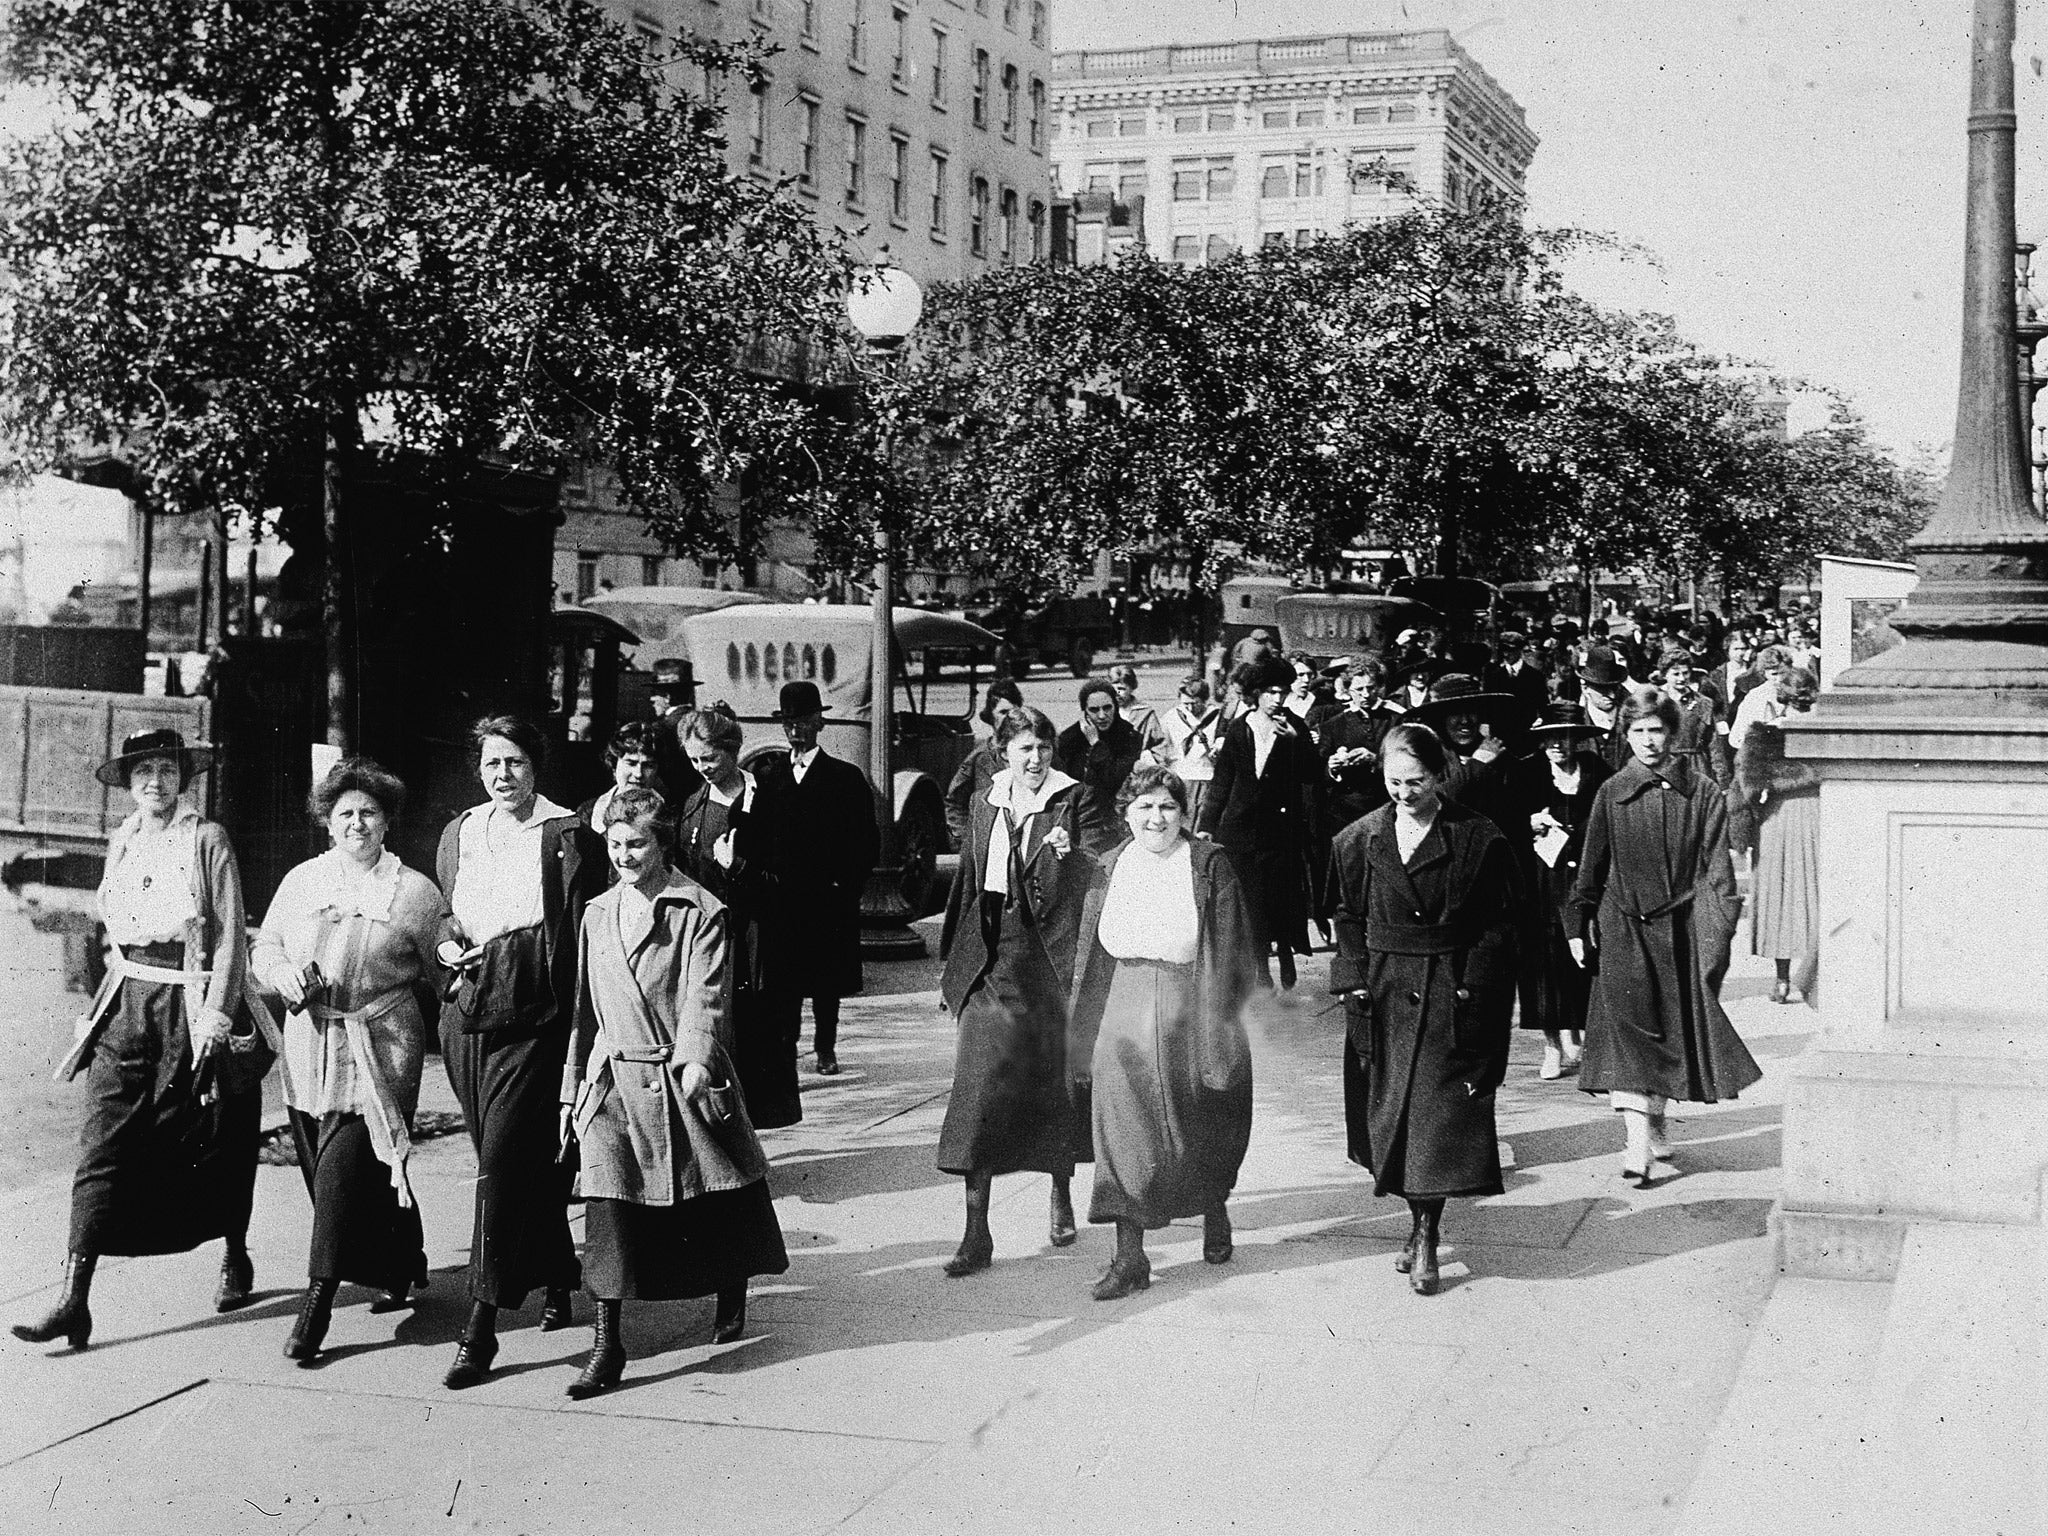 Women from the Department of War took 15-minute walks to breathe in fresh air to ward off the influenza virus during World War I